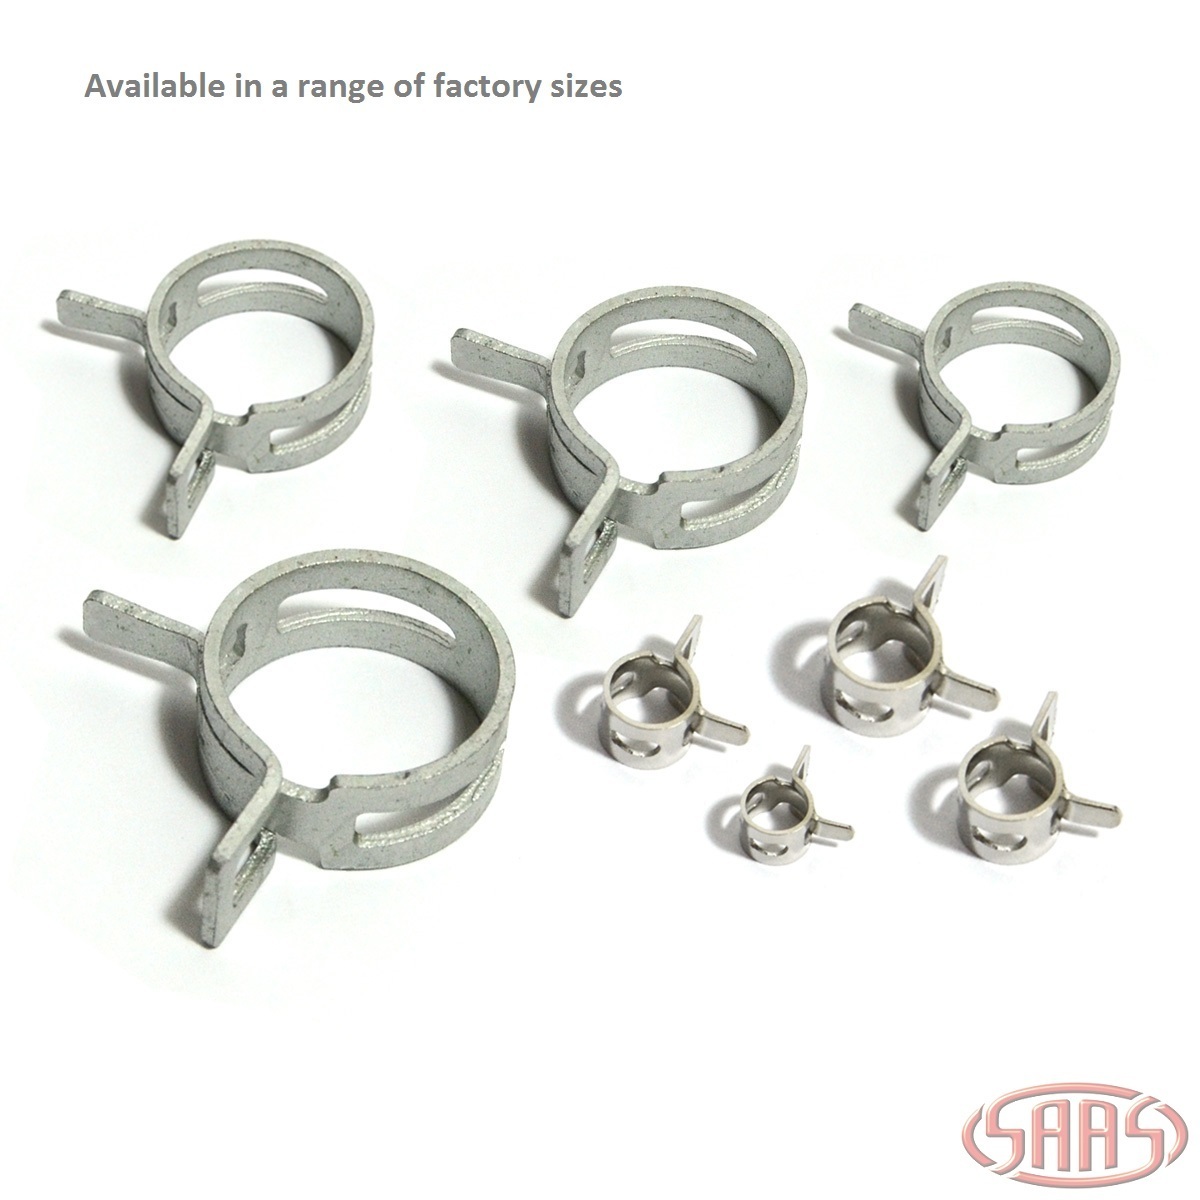 Hose Clamps Spring Size 3 these suit 3mm (1/8") hose Pack of 6